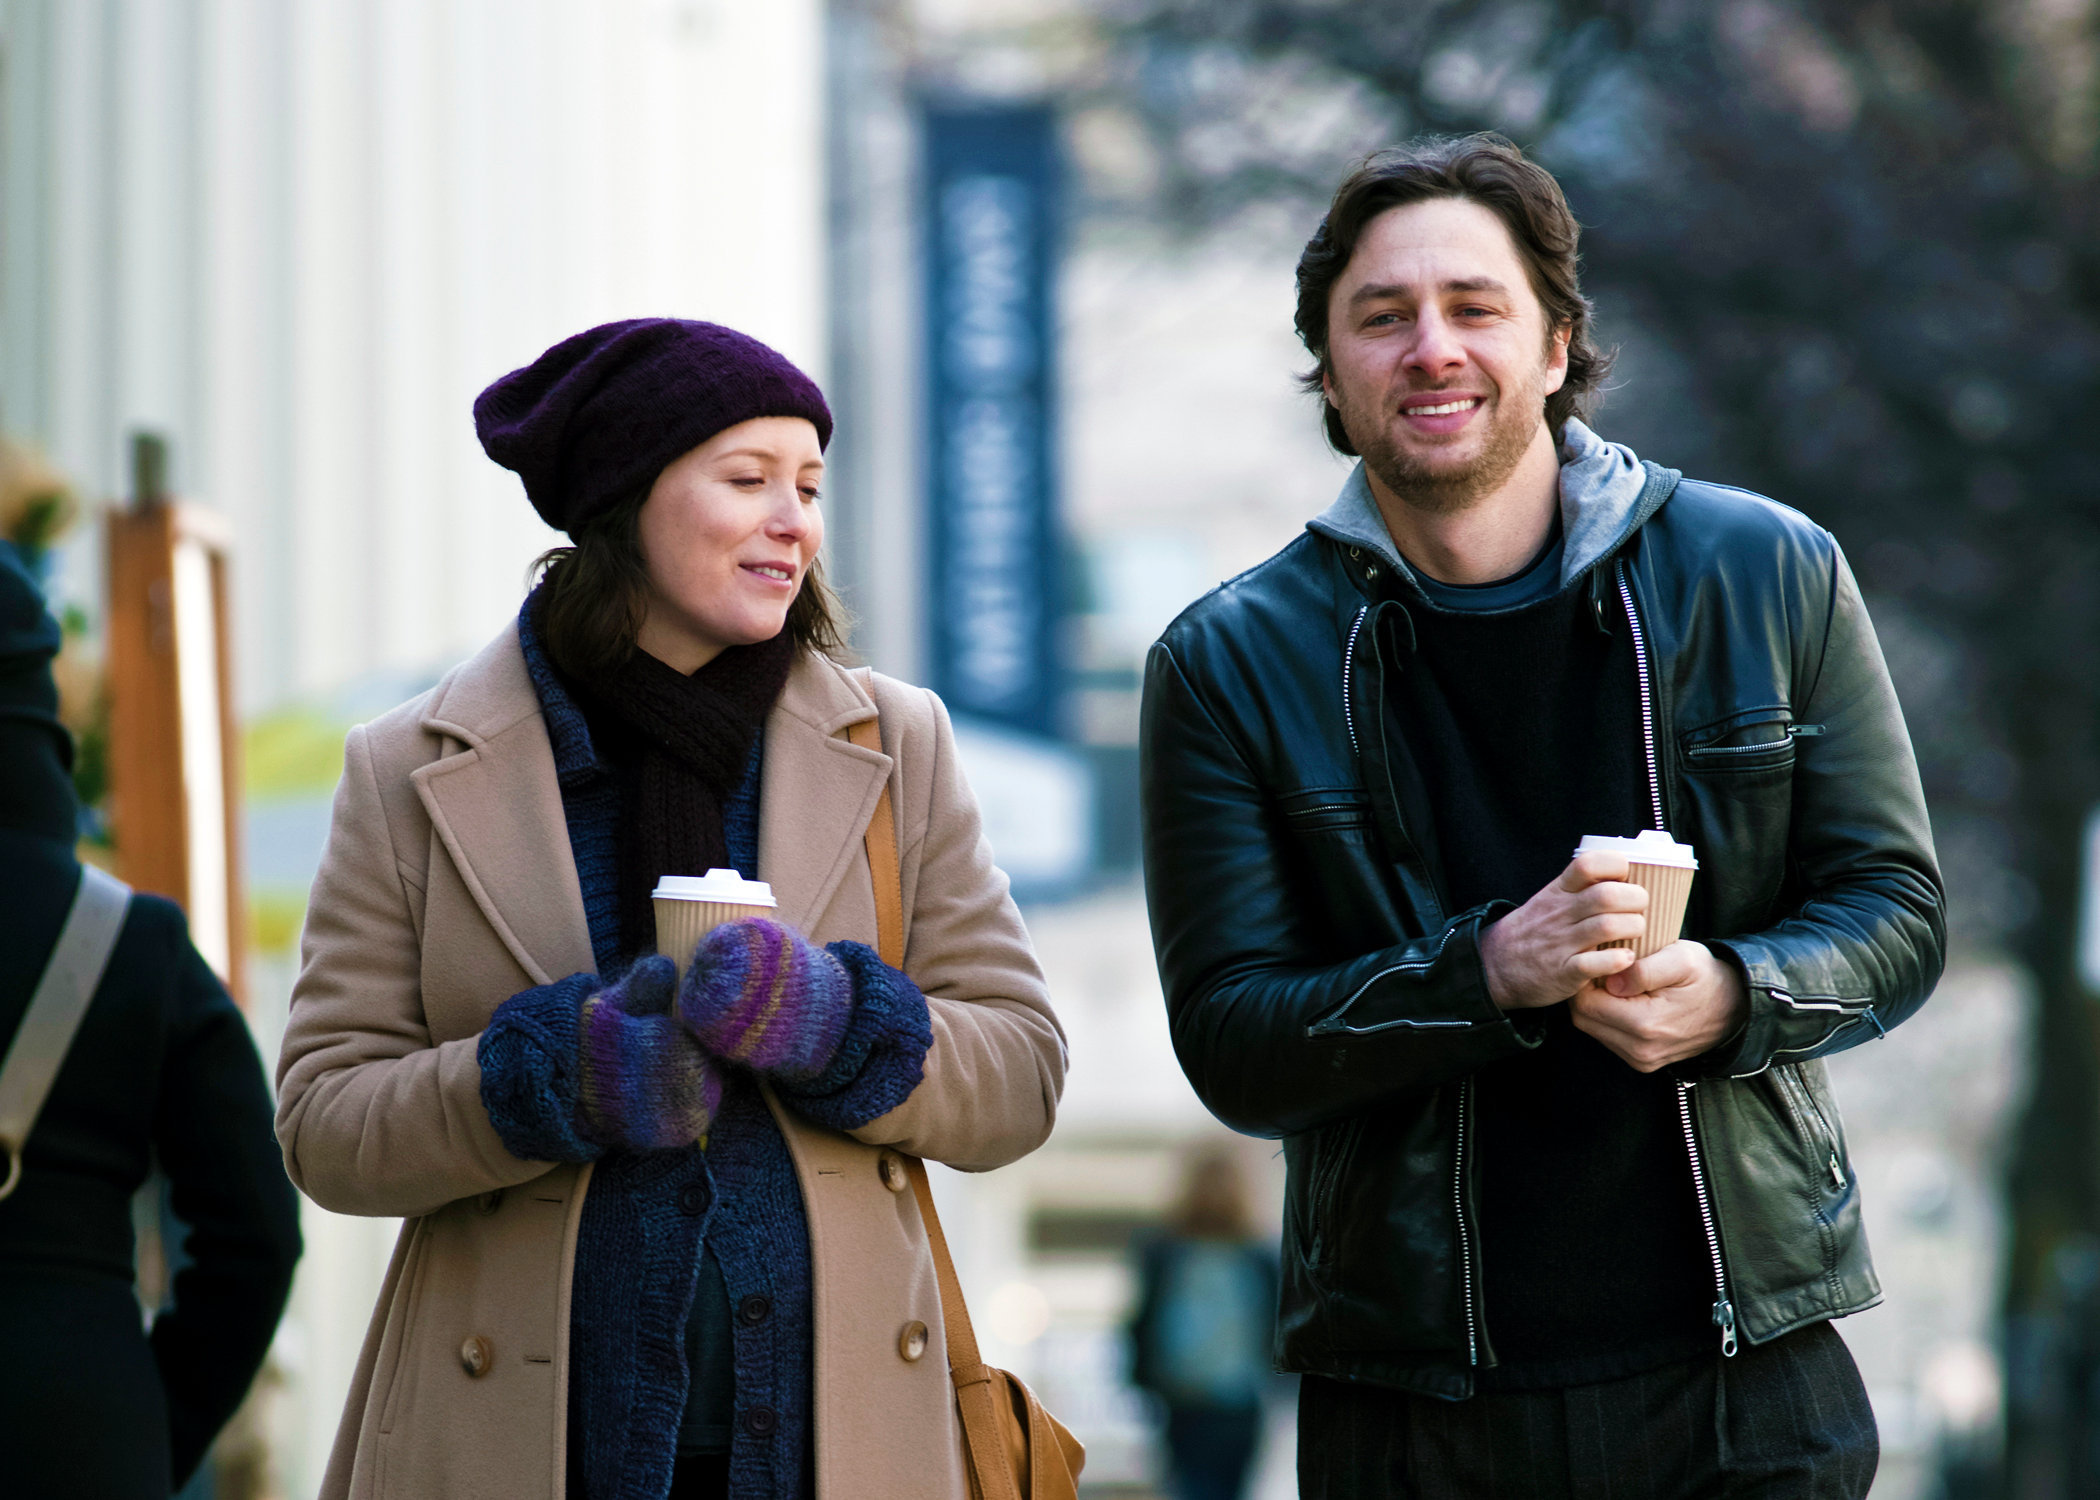 Isabelle Blais stars as Nathalie and Zach Braff stars as Henry Welles in Tribeca Film's The High Cost of Living (2011)